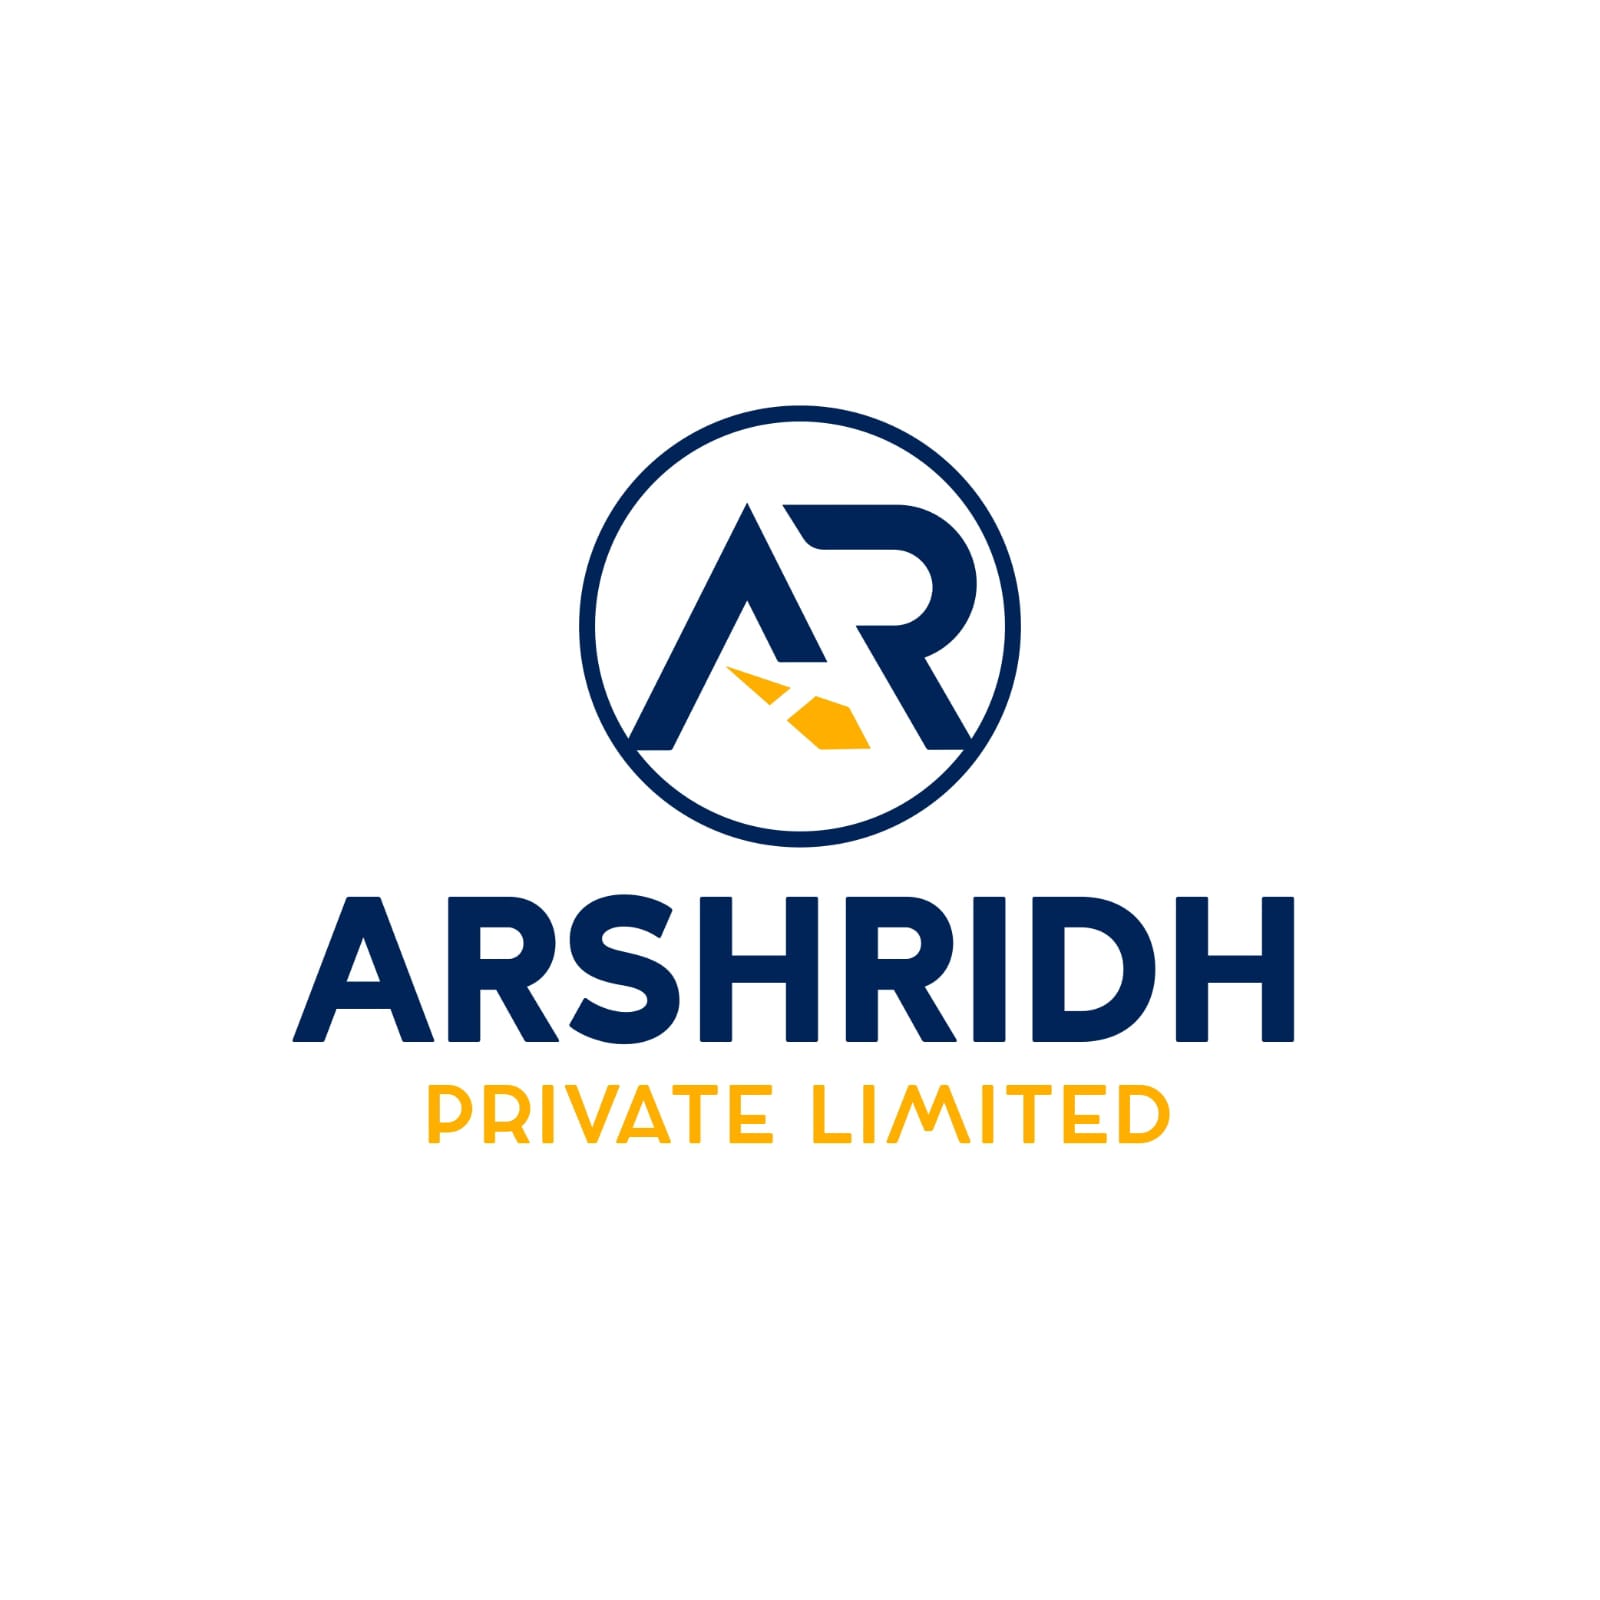 Arshridh Private Limited in Elioplus